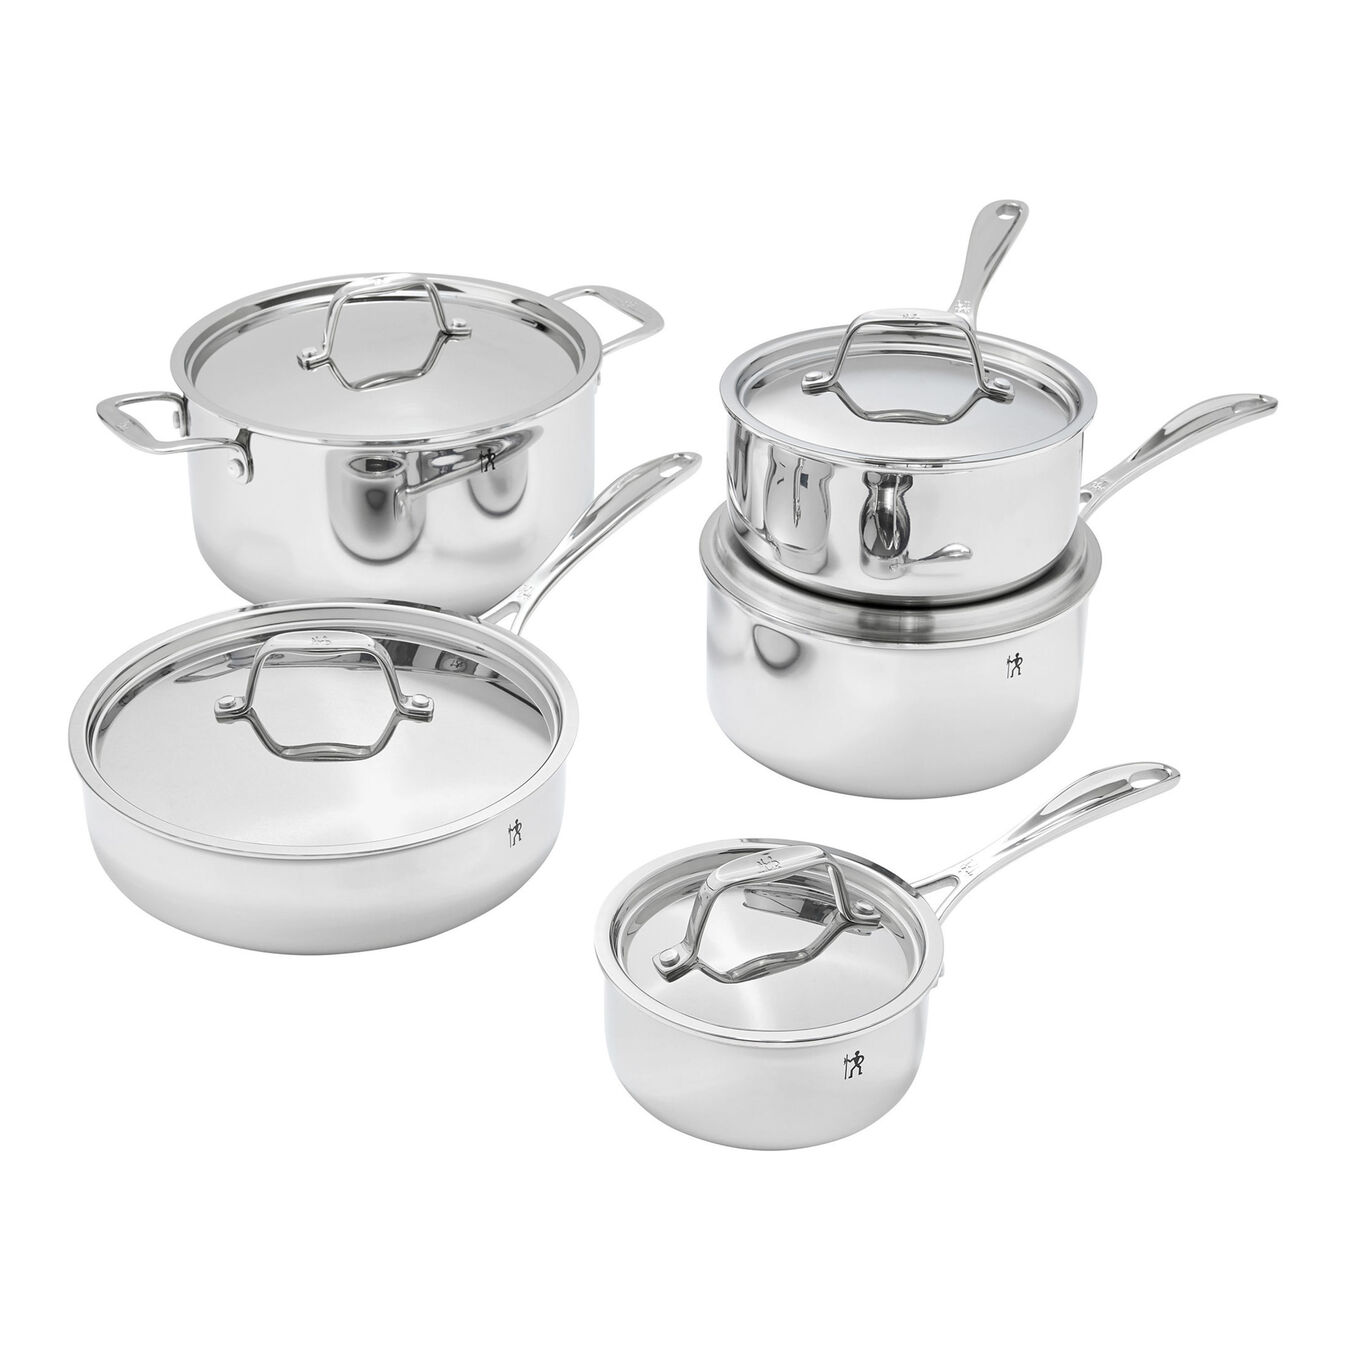 Cookware Set 13 Piece, 18/10 Stainless Steel,,large 1